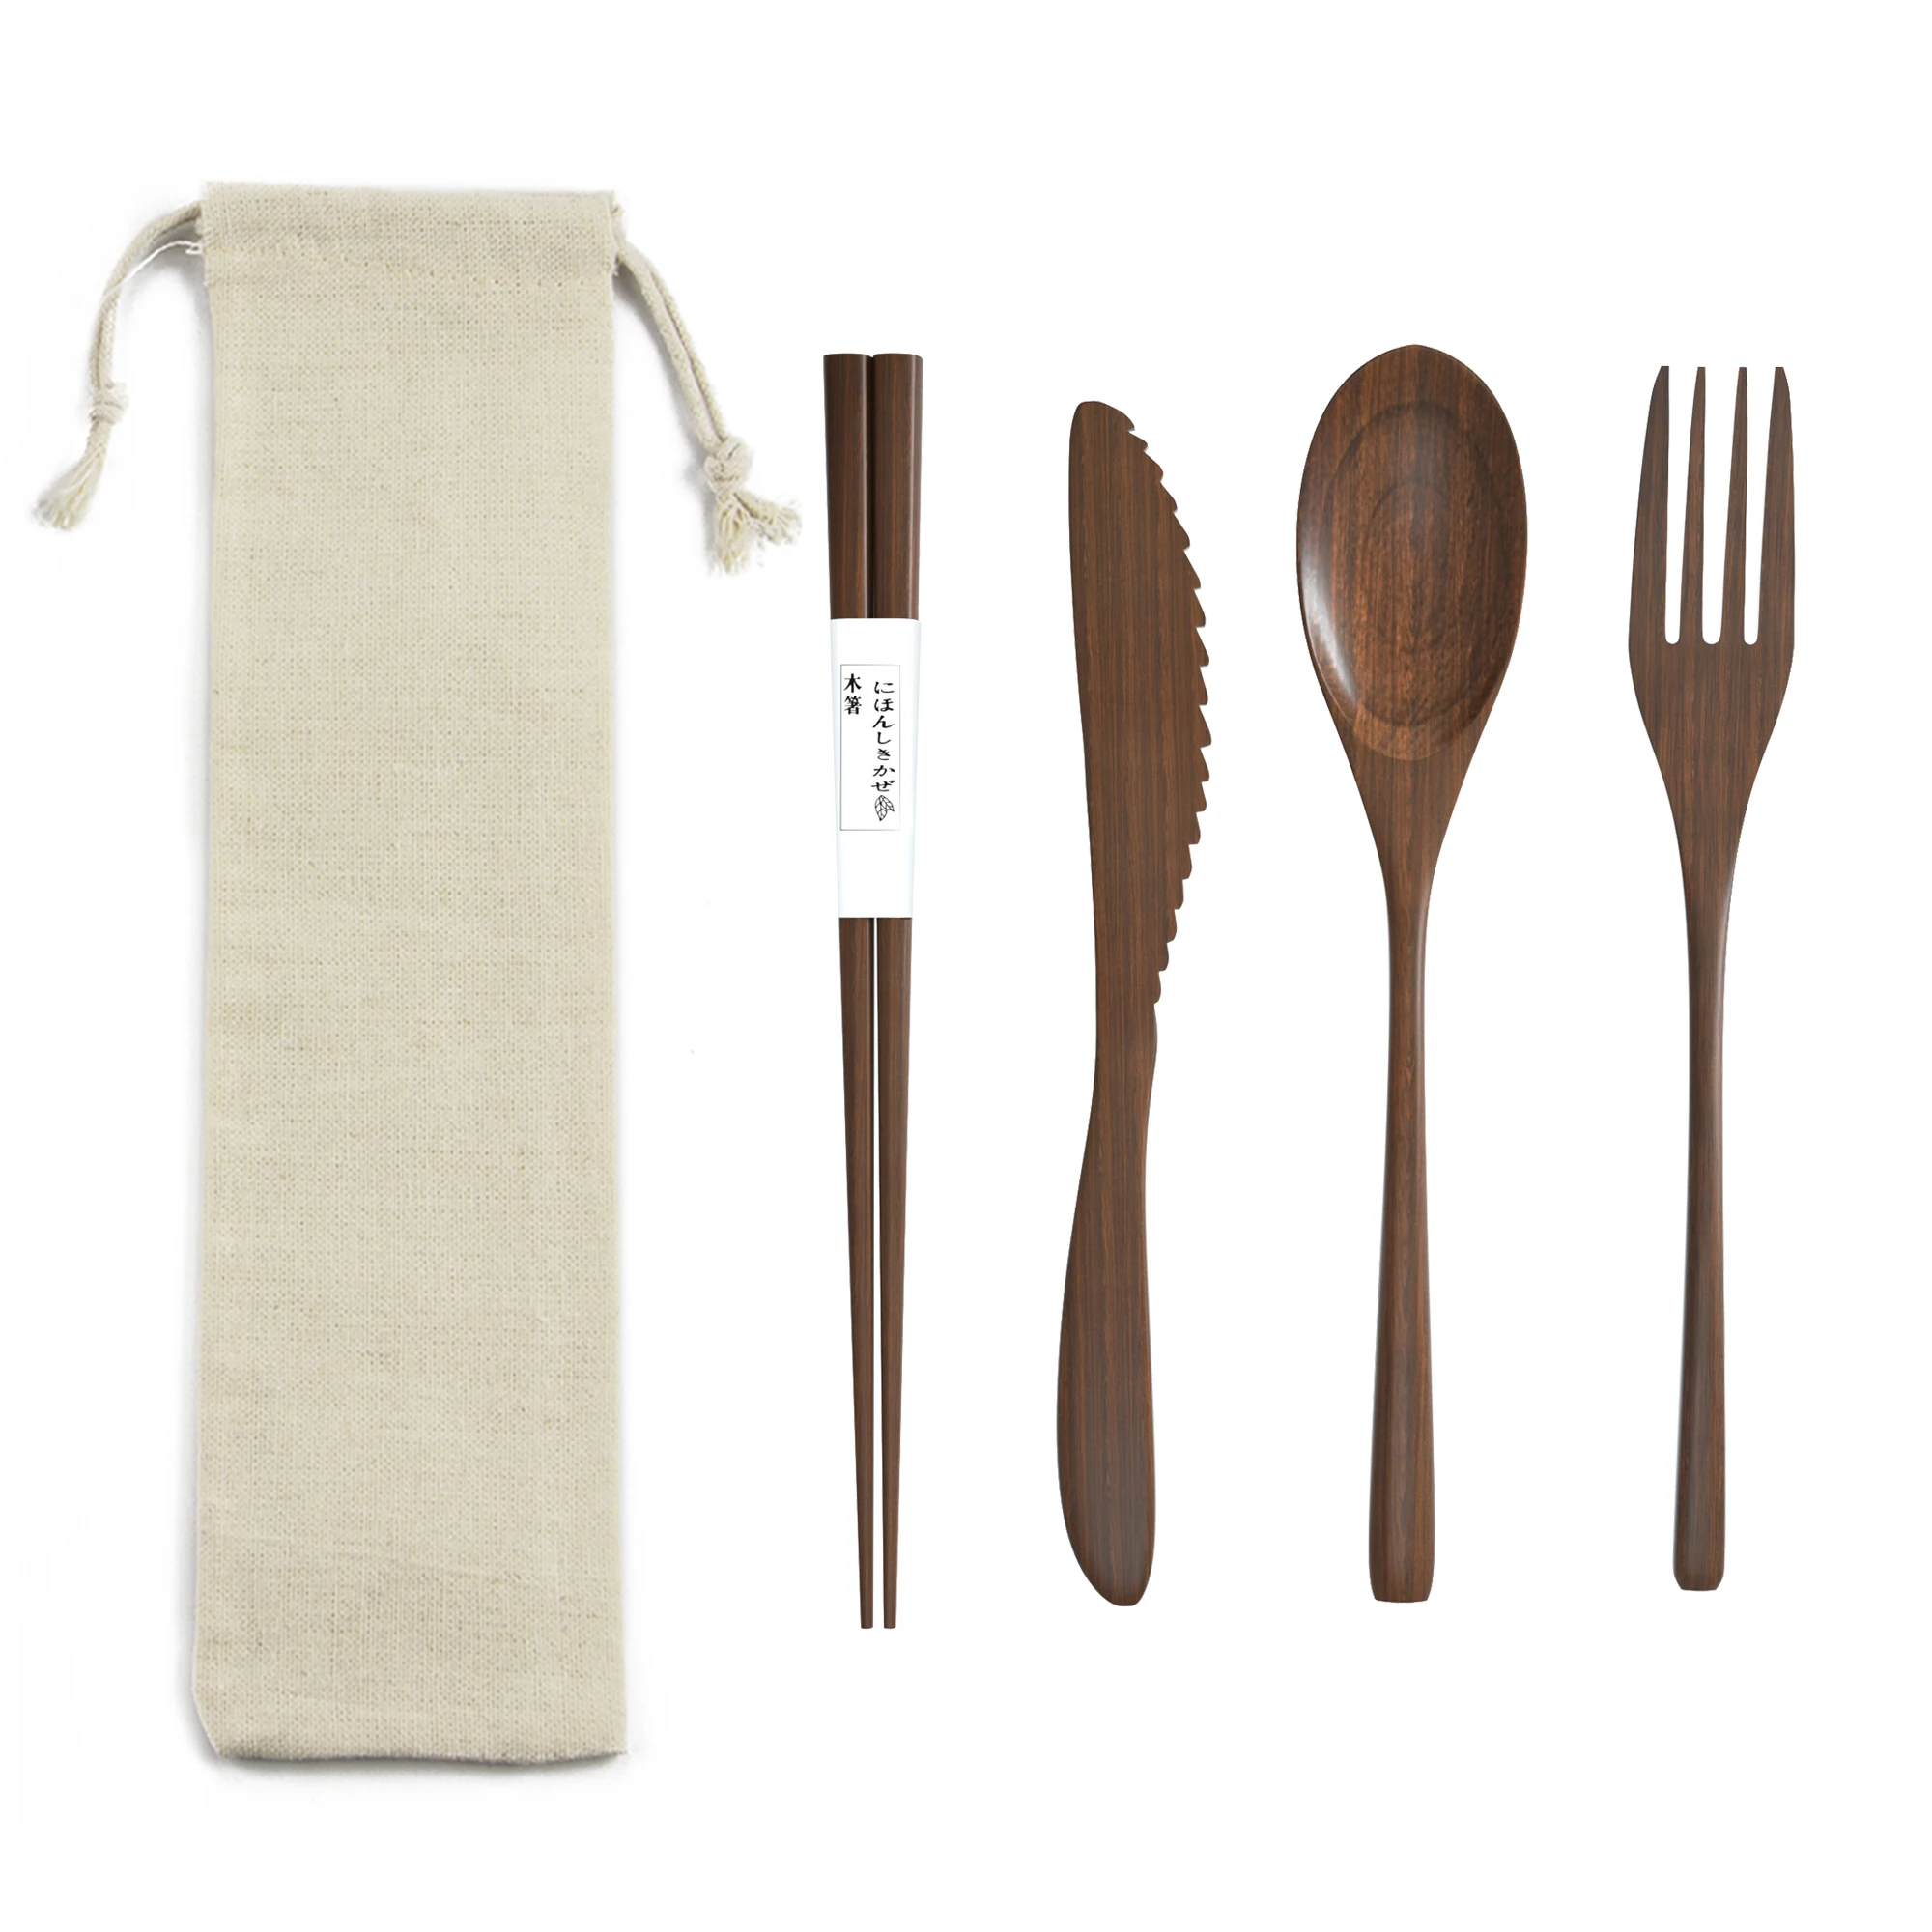 Reusable Natural Wooden Fork Spoon Flatware Set W/Pouch For Camping Travel 